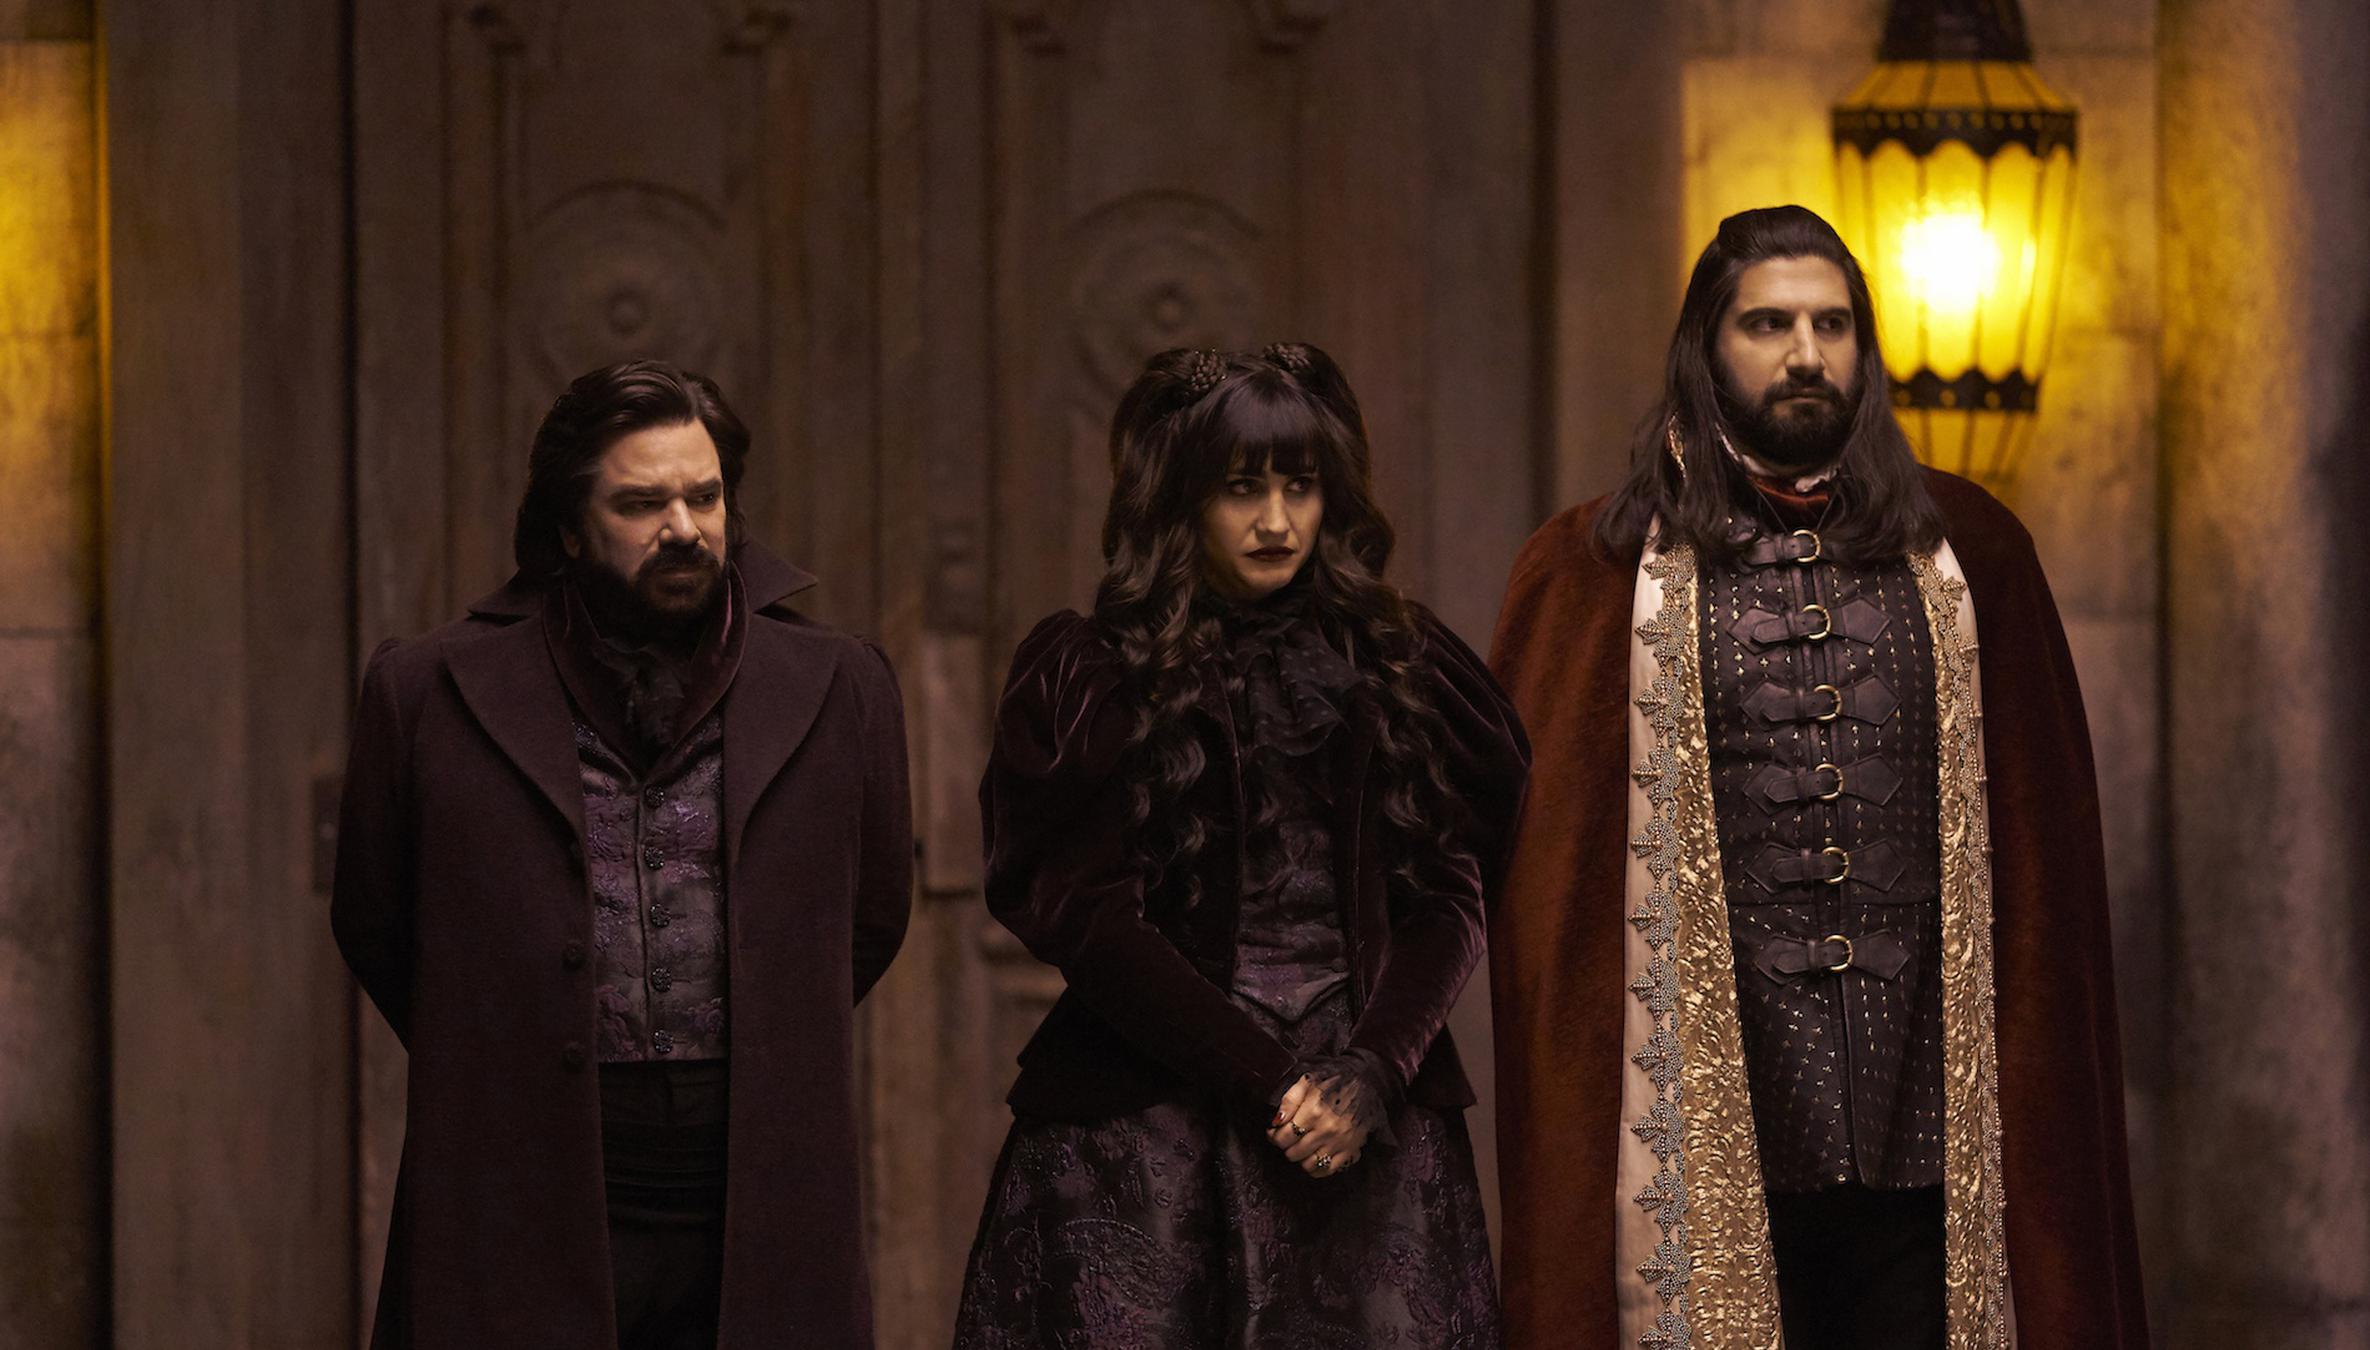 ‘What We Do in the Shadows’ Should Win at the SAG Awards